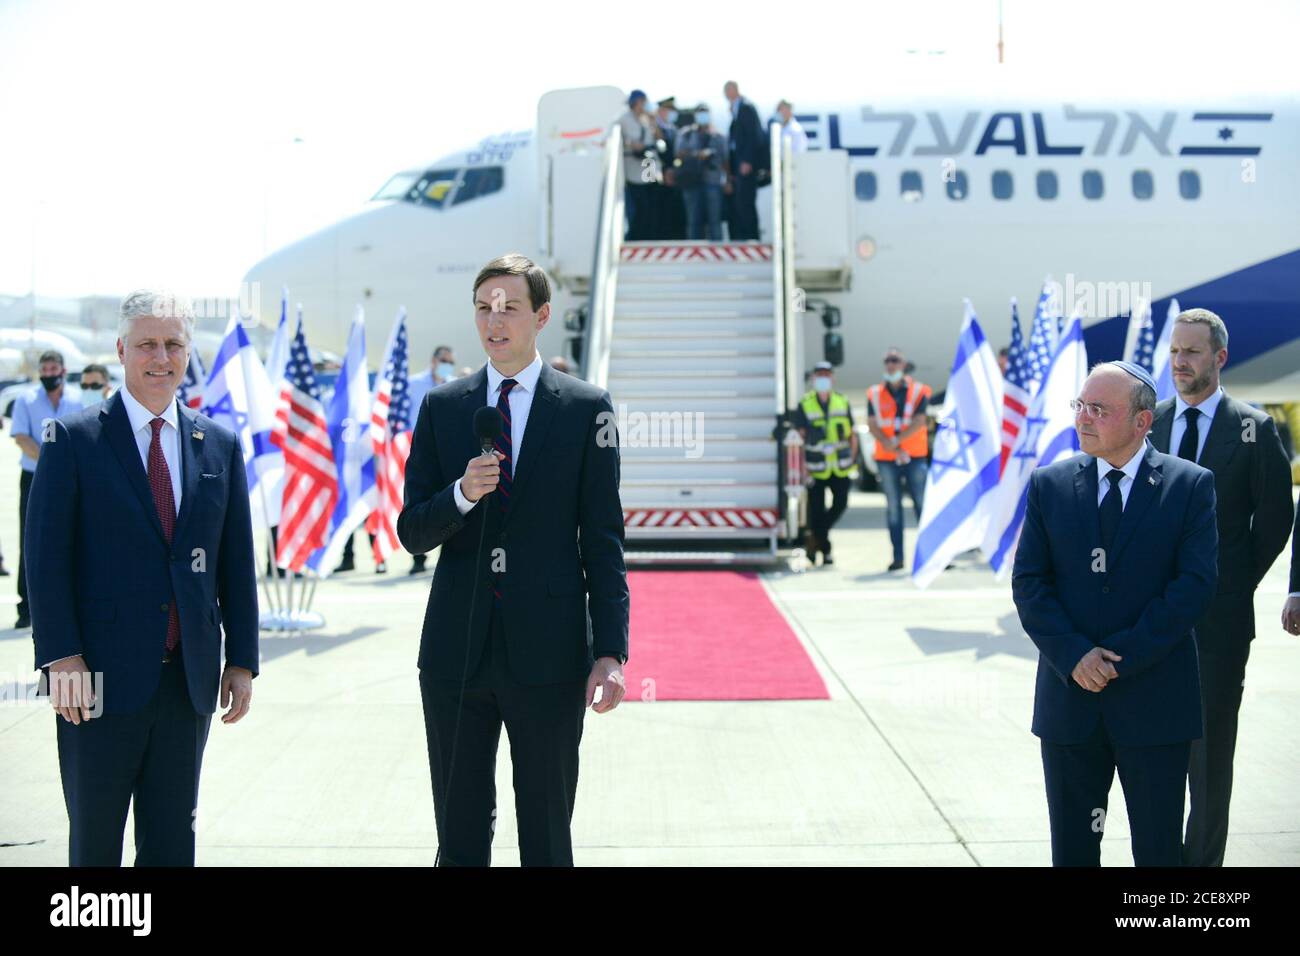 Lod, Israel . 31st August, 2020. Senior U.S. Presidential Advisor Jared Kushner (2nd L) speaks while standing with Israel's chief of National Security Council Meir Ben Shabbat (2nd R) and U.S. National Security Advisor Robert O'Brien (1st L) before their departure to United Arab Emirates (UAE) at Ben Gurion International Airport near central Israeli city of Tel Aviv on Aug. 31, 2020. An Israeli delegation, joined by senior U.S. officials, departed from Tel Aviv on Monday to Abu Dhabi in Israel's first commercial flight to the United Arab Emirates. Credit: Xinhua/Alamy Live News Stock Photo